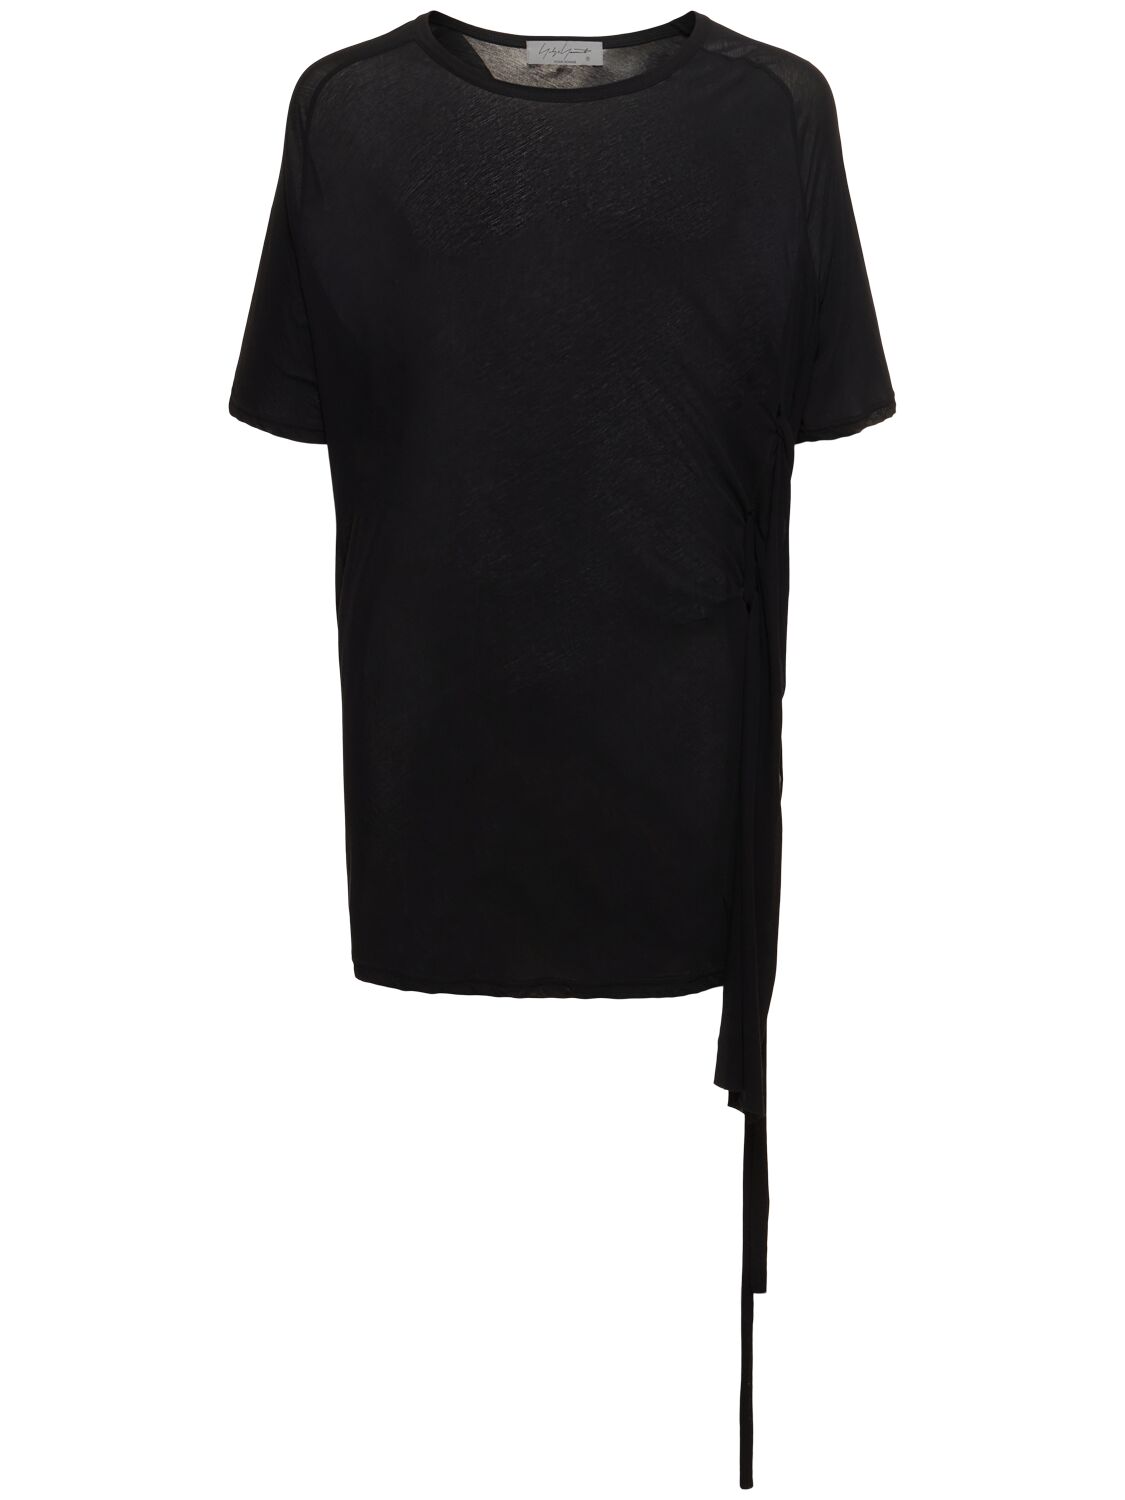 Image of Cotton Side String T-shirt